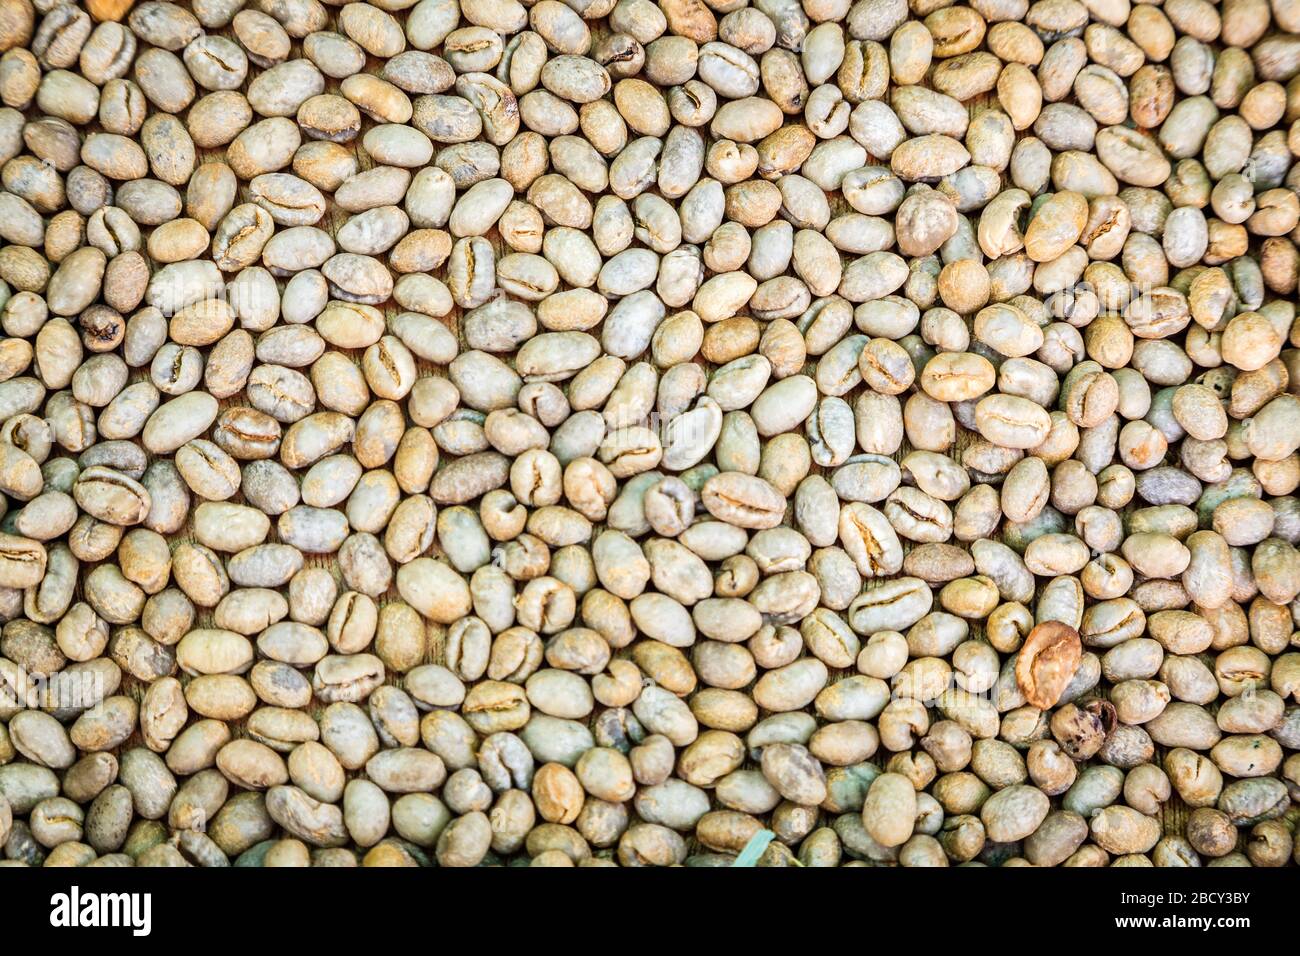 Close-up image of  raw coffee beans at a processing plant Stock Photo